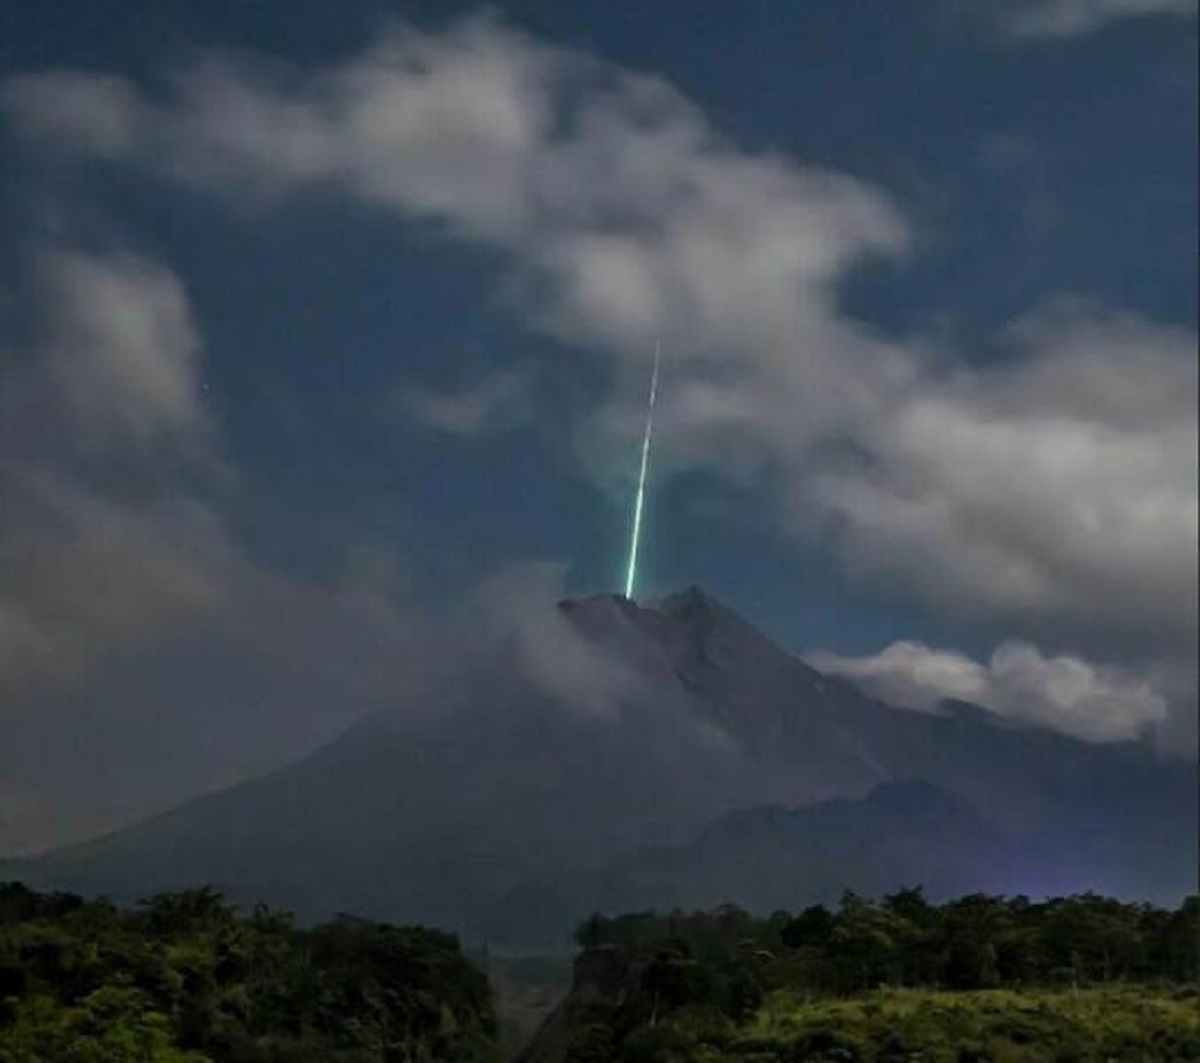 "A Meteor Falling Into The Most Active Volcano In Indonesia, Mount Merapi"